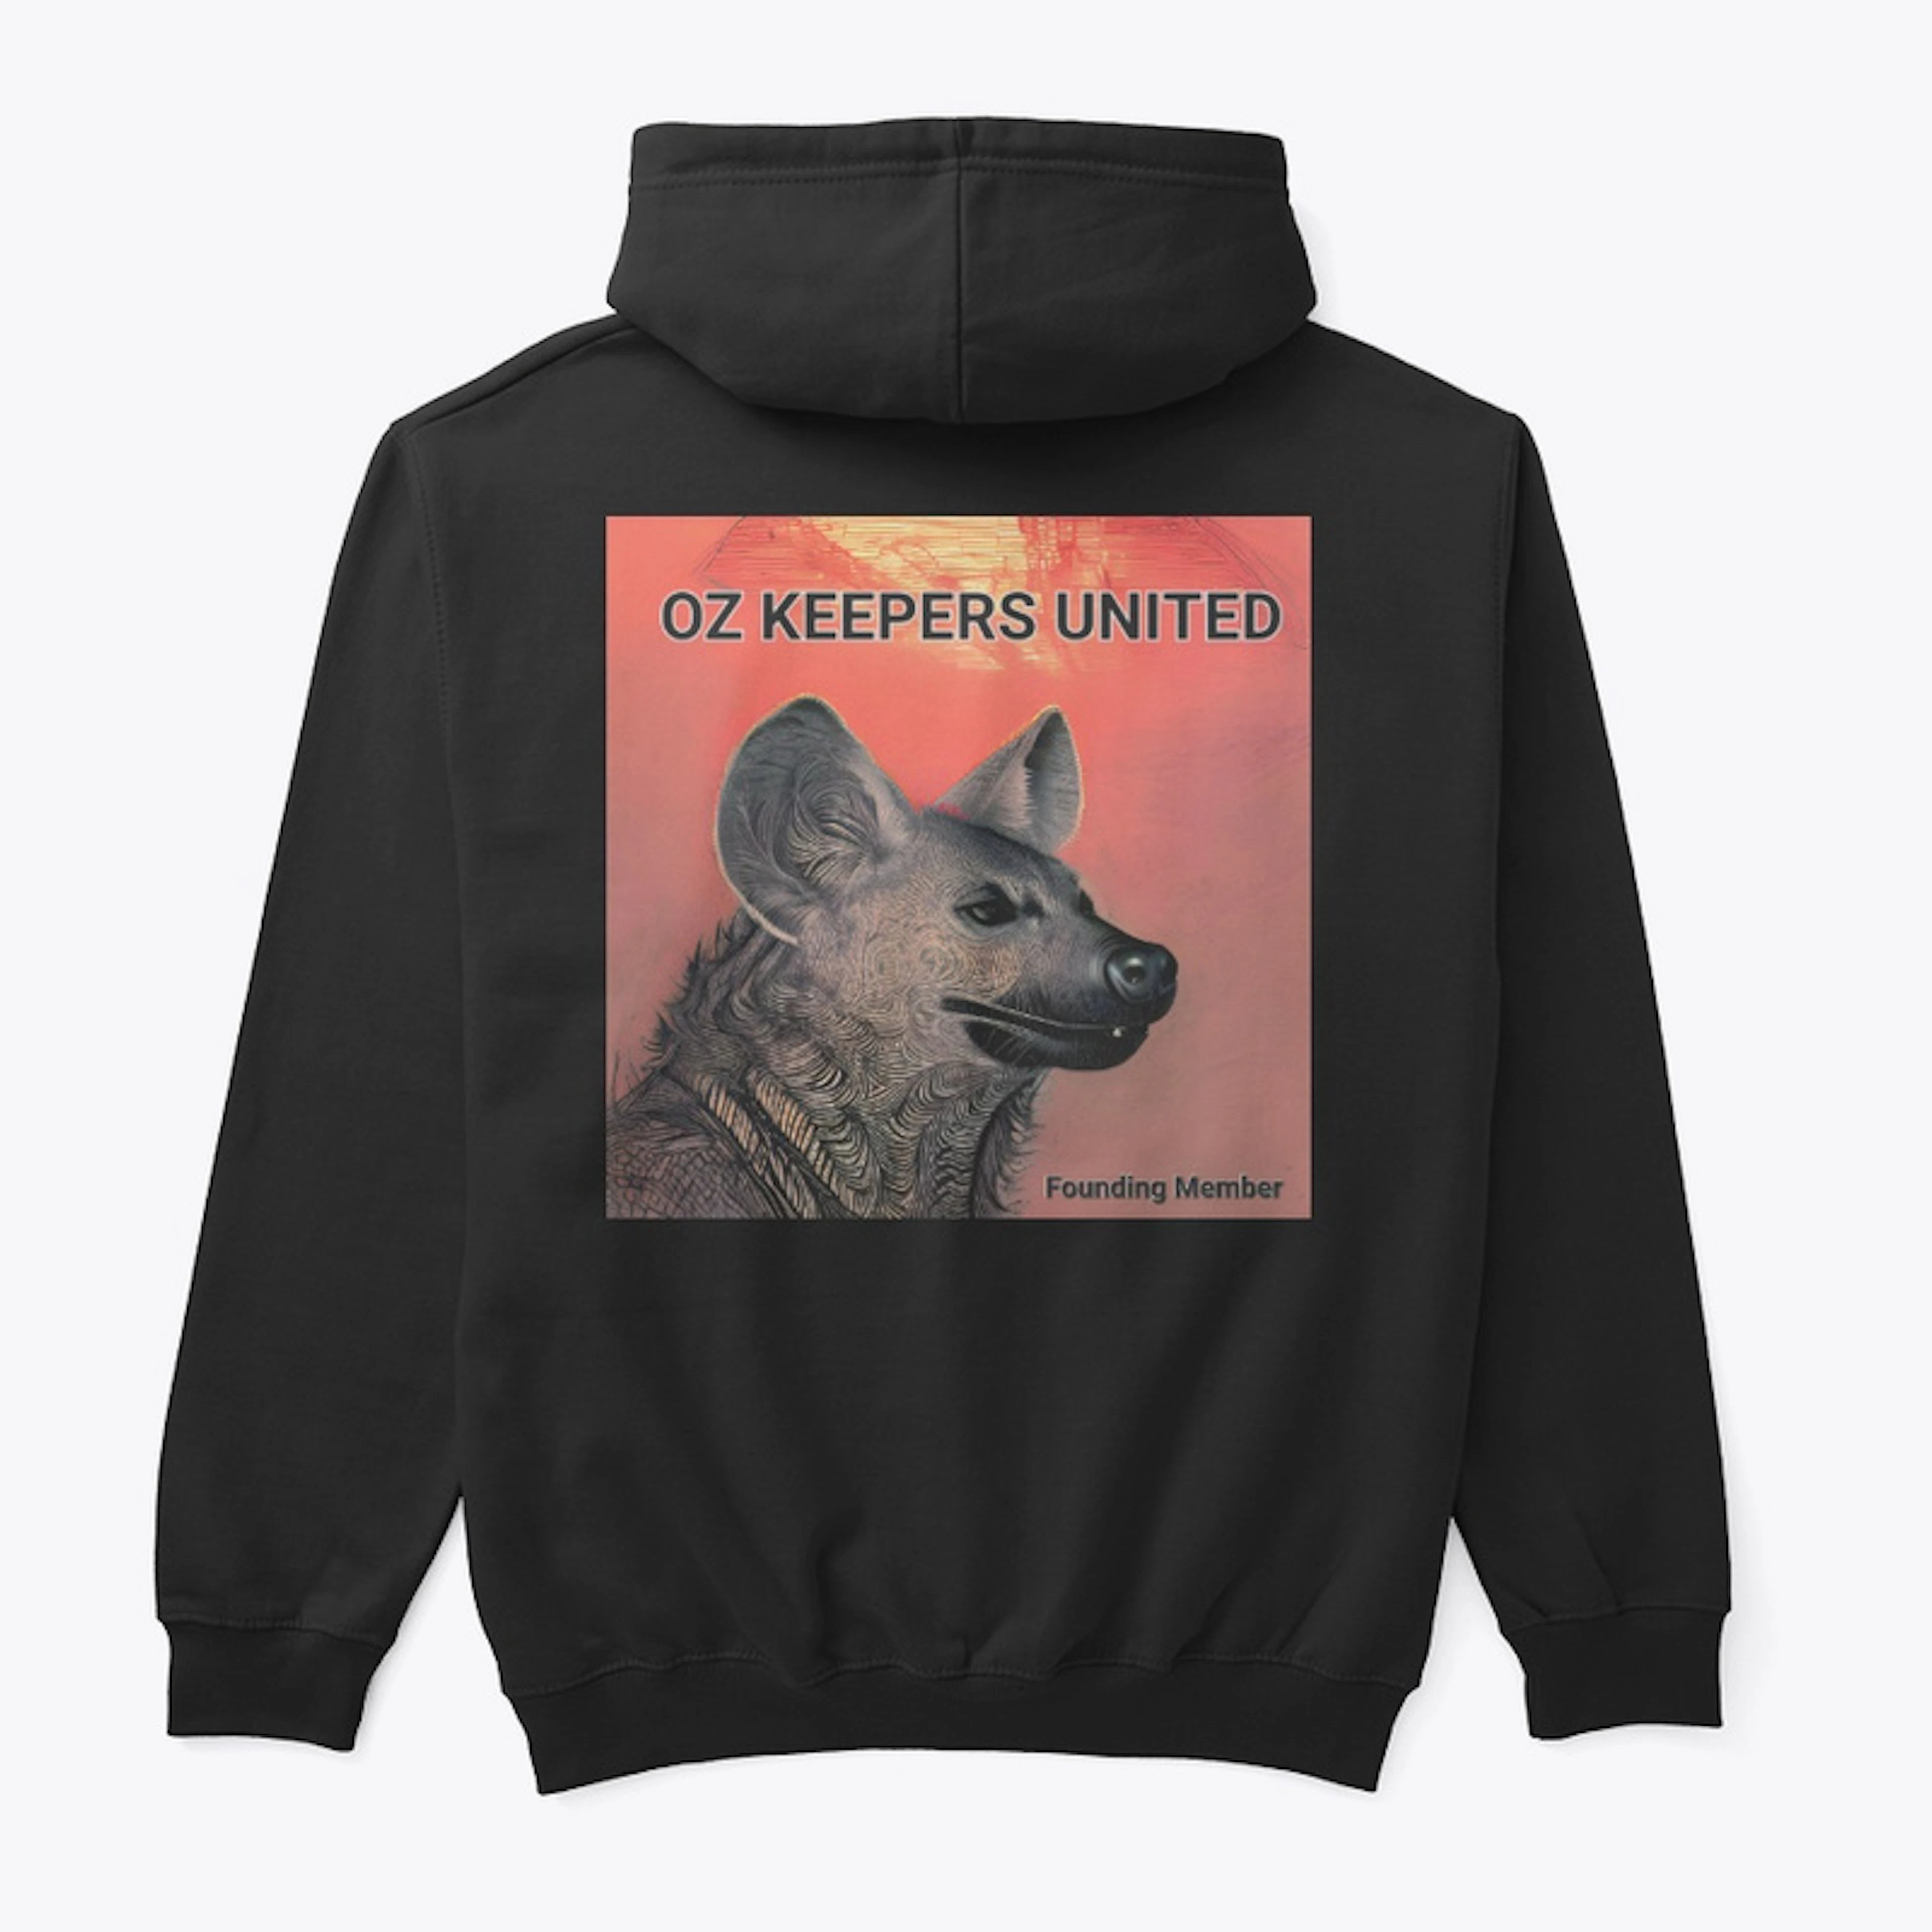 OZ KEEPERS UNITED FOUNDER SHIRT